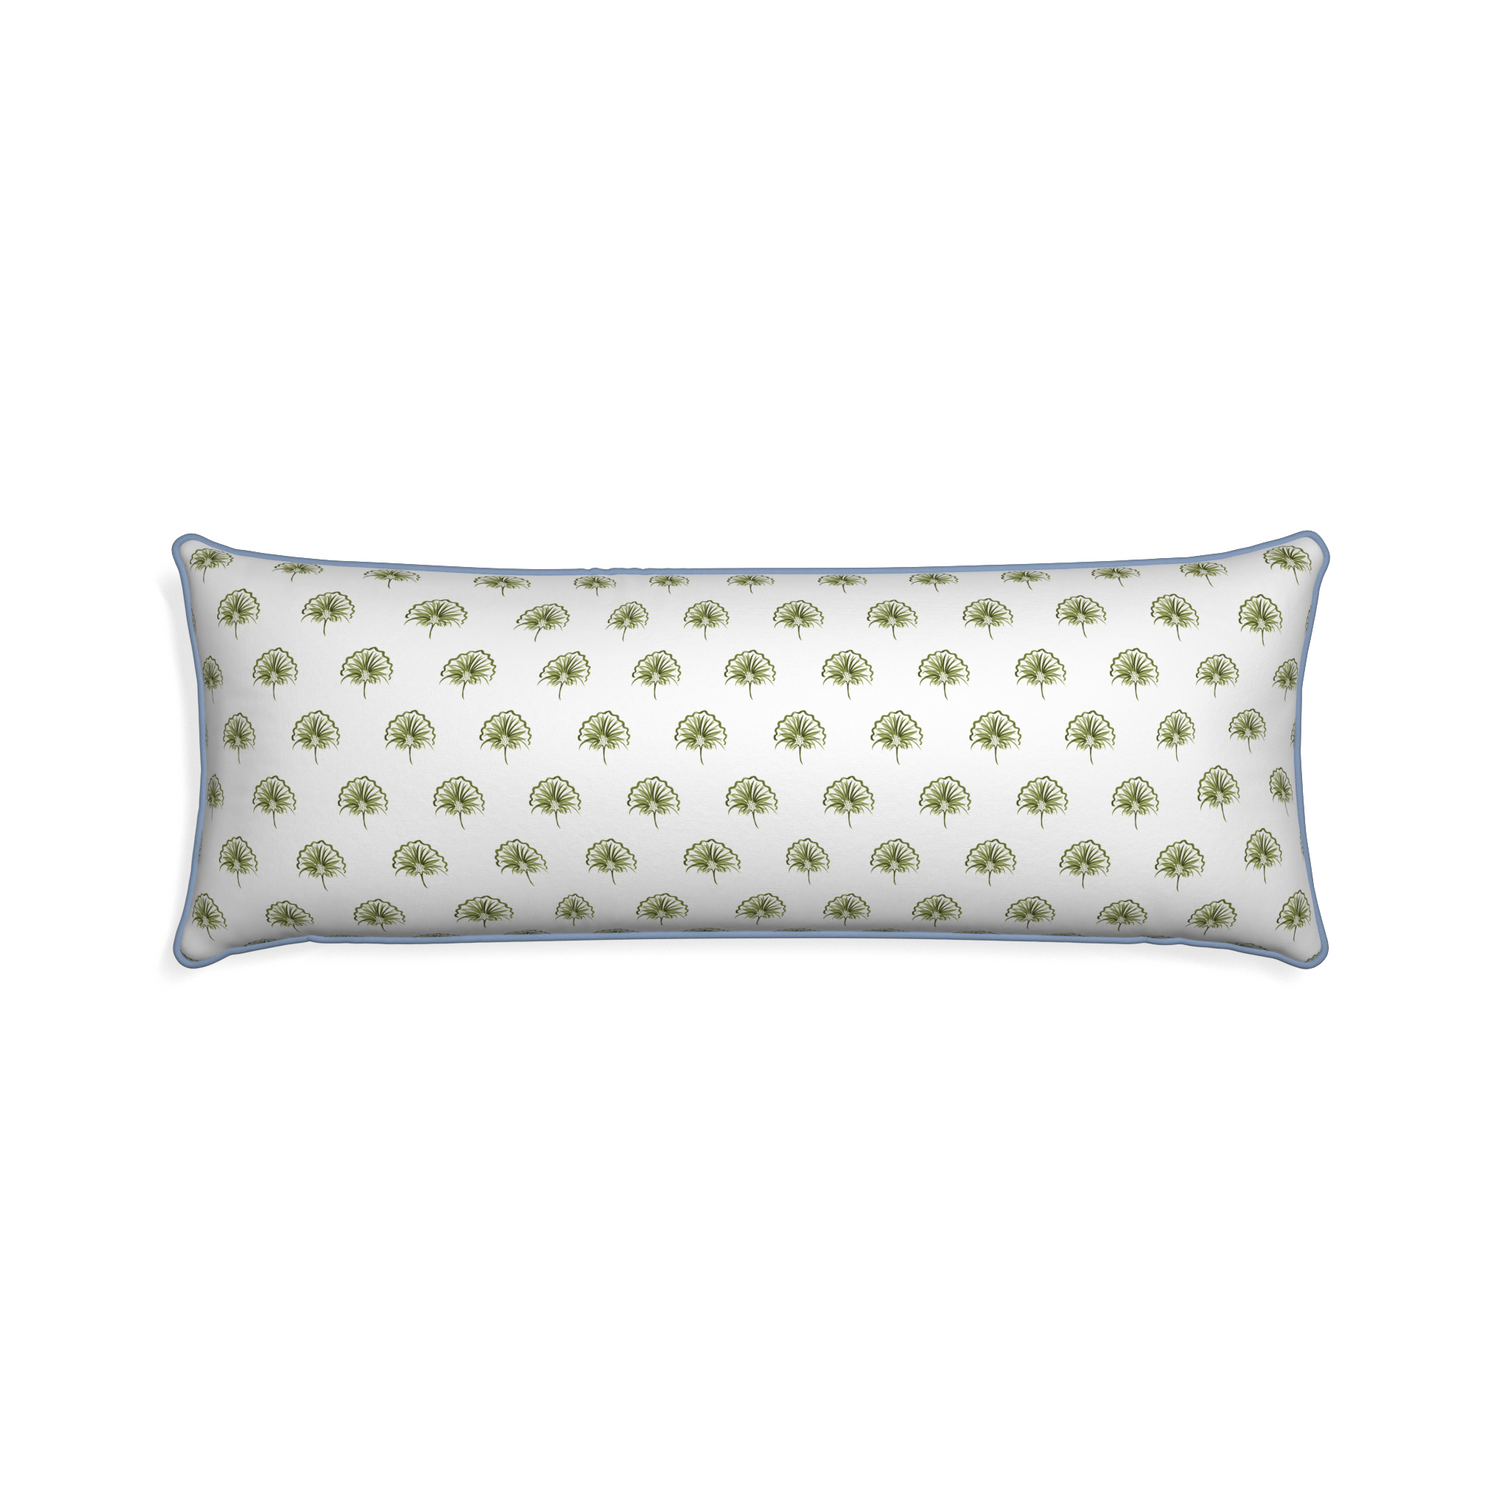 Xl-lumbar penelope moss custom green floralpillow with sky piping on white background